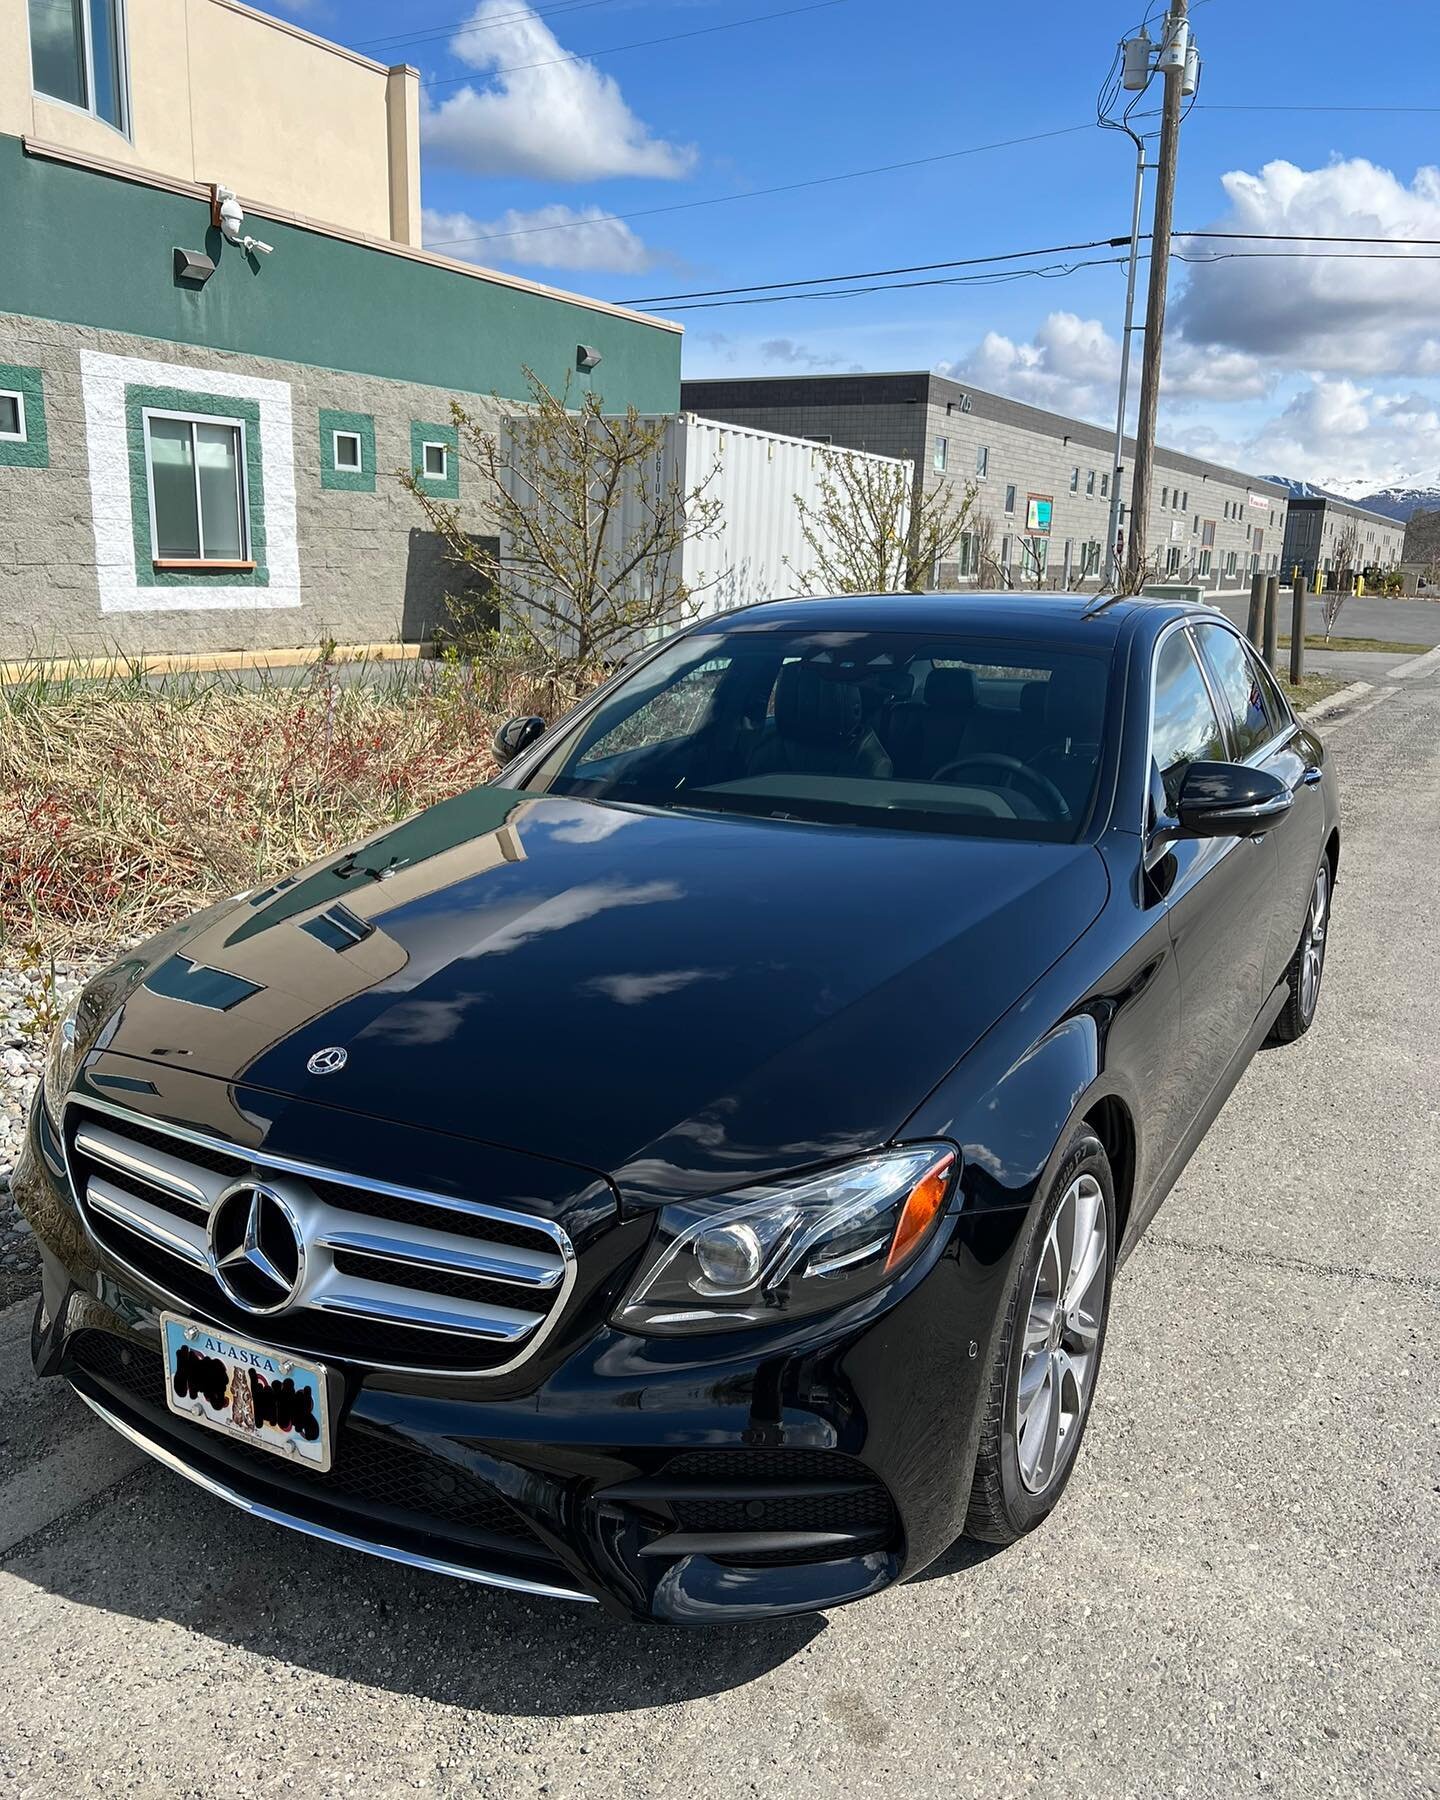 Light paint correction on another beautiful mercedes to bring back that deep black. Swipe for the results!! ➡️➡️➡️
.
.
.
#autodetailing #autodetailer #paintcorrection #anchorage #anchoragealaska #detailing